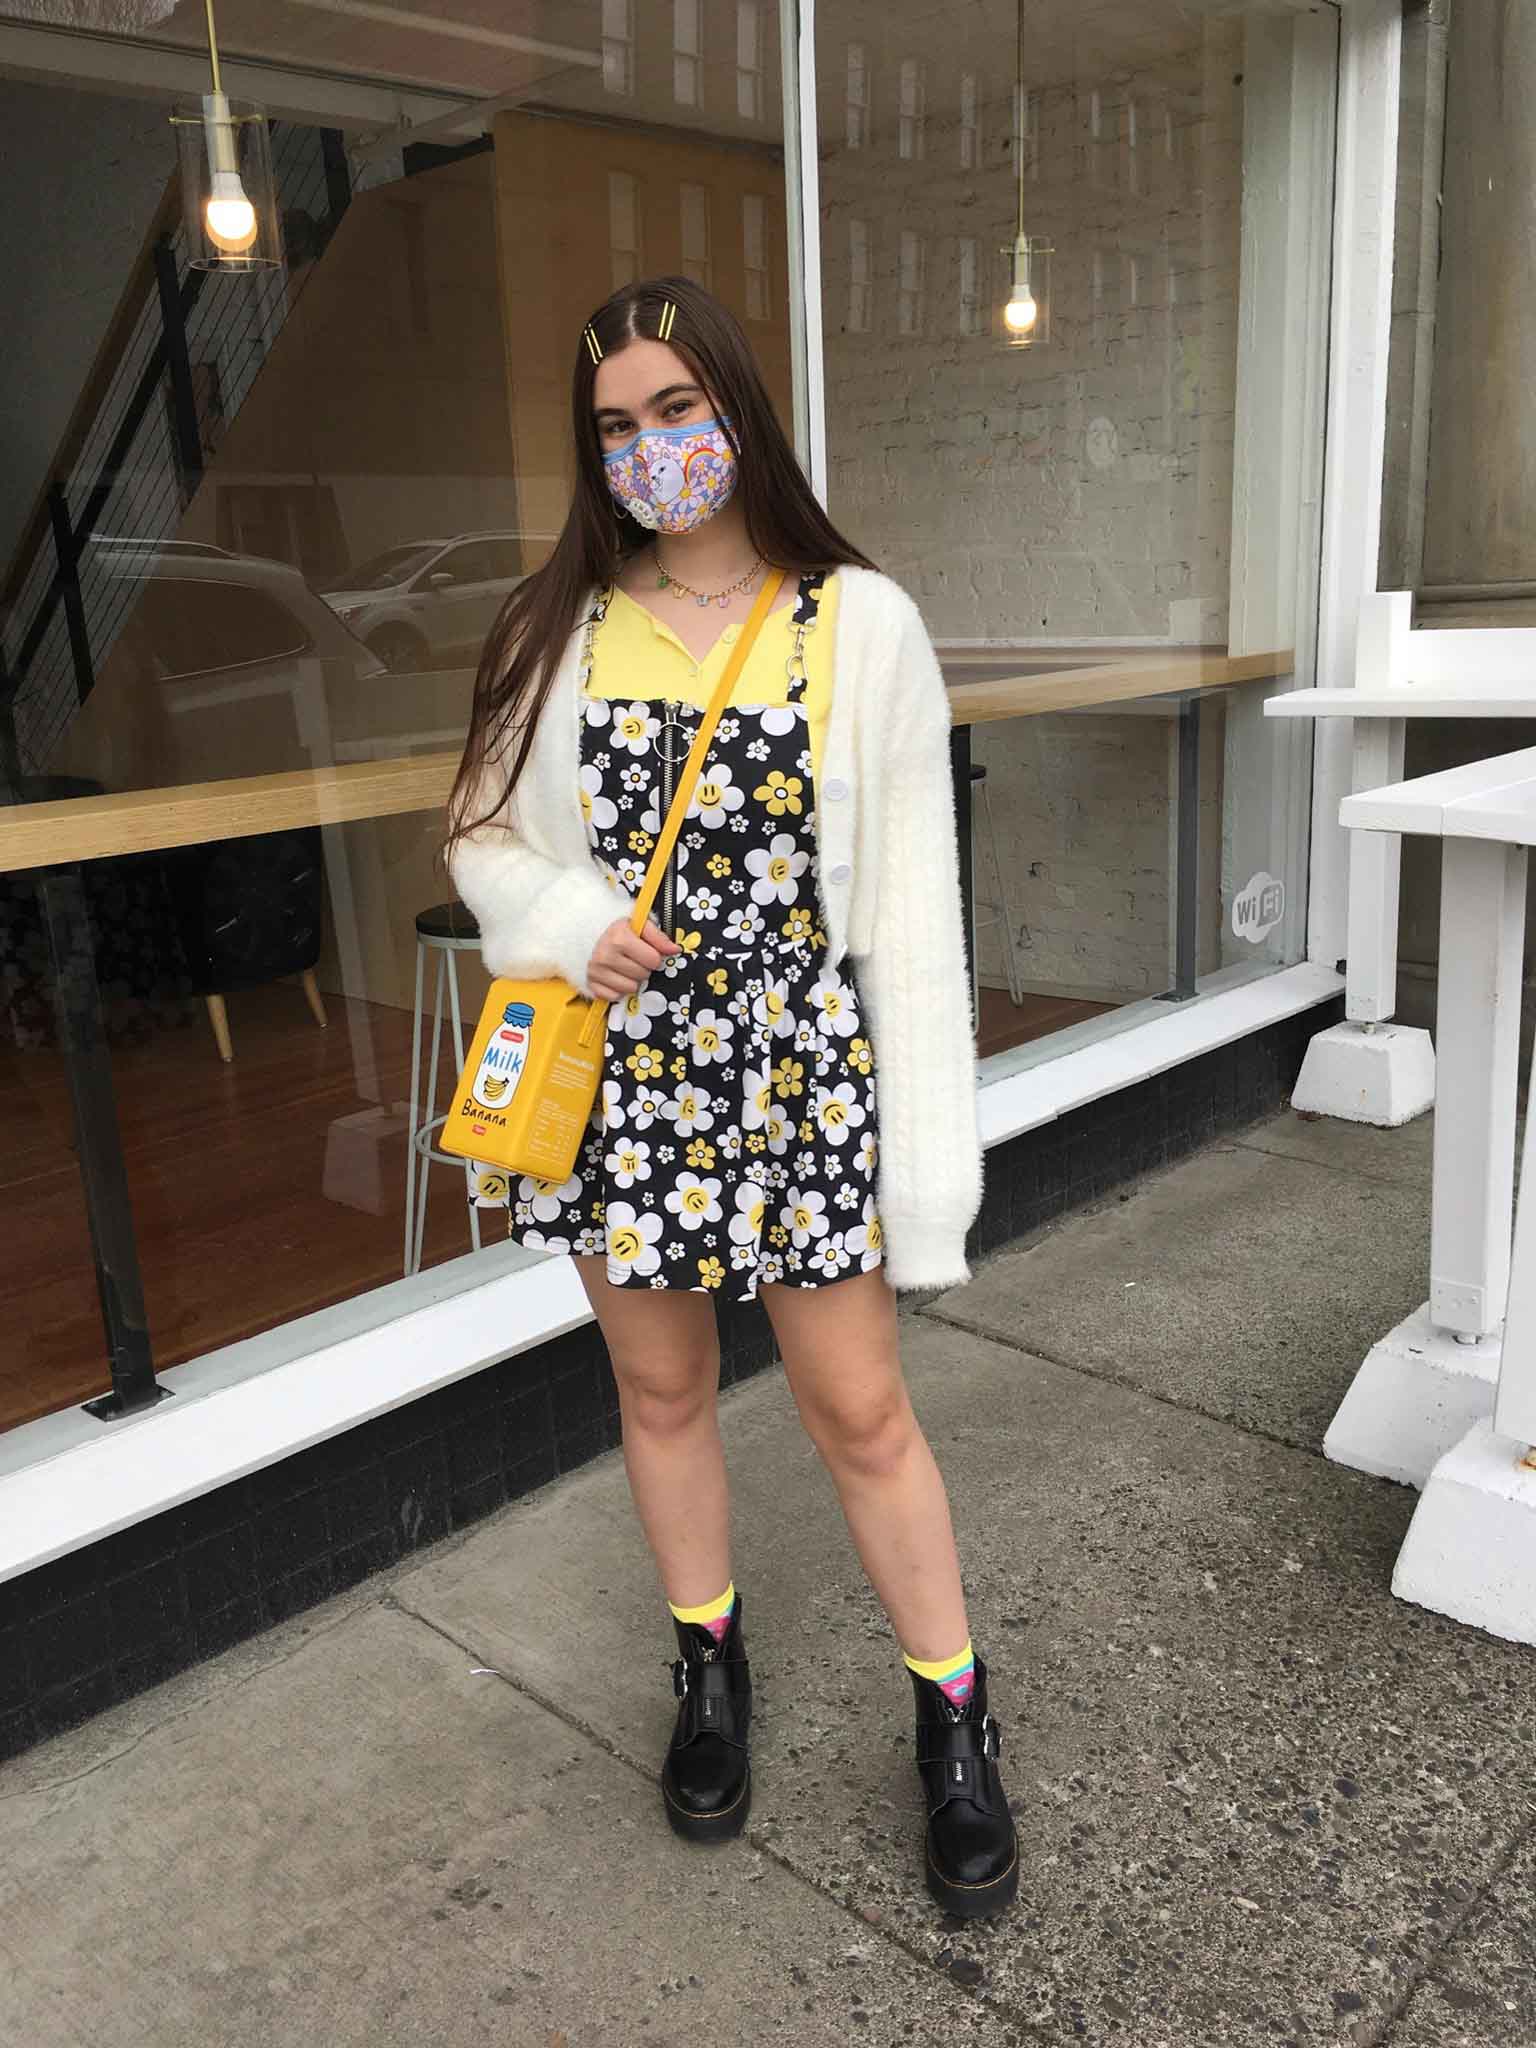 Person wearing black daisy print dress with a yellow t-shirt underneath, cream cropped cardigan, black boots, and a milk carton shaped purse.